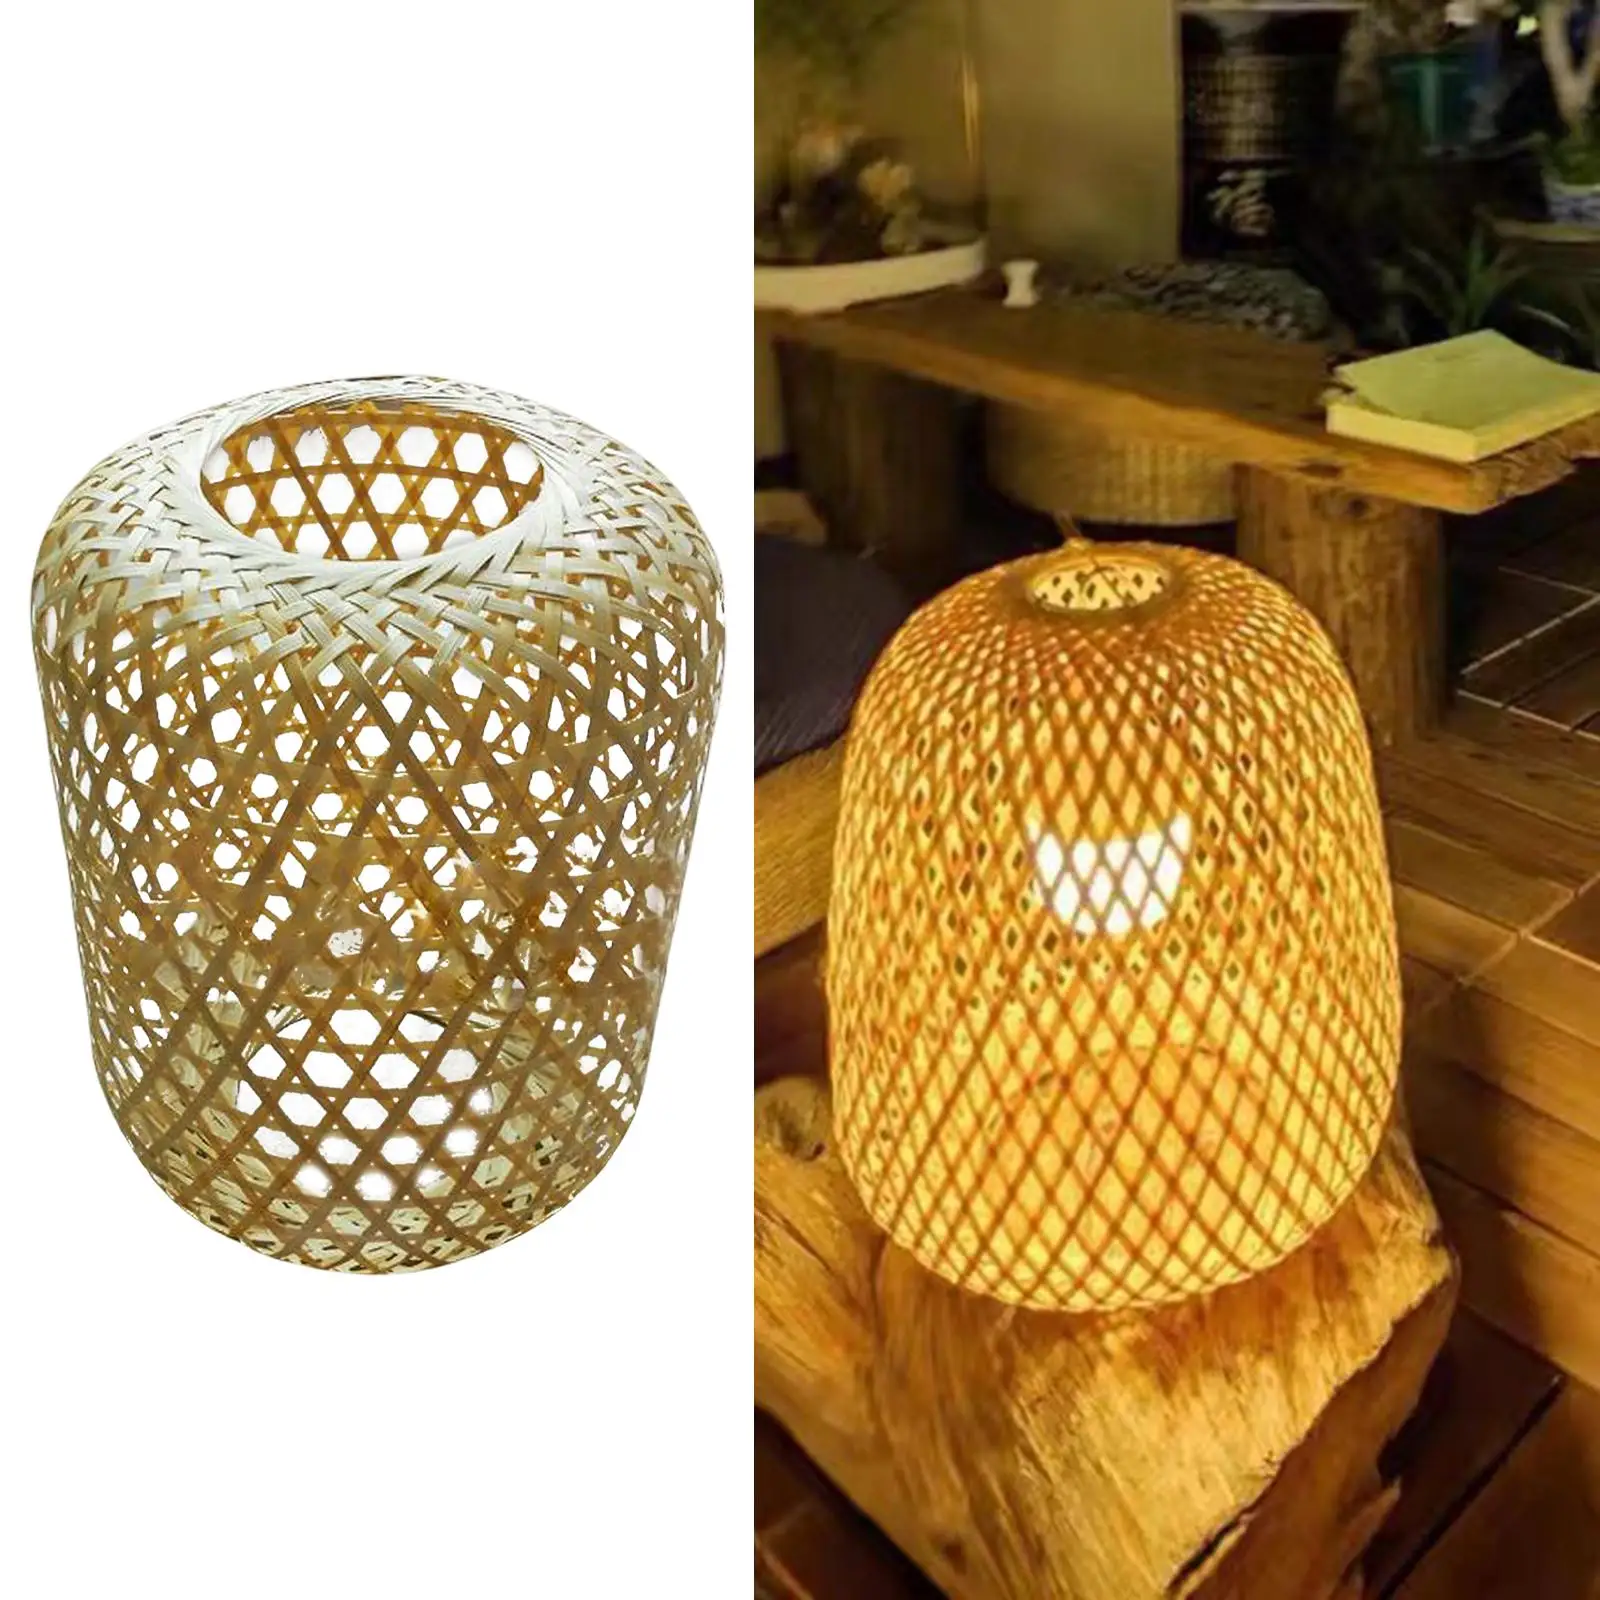 2xHandwoven Bamboo Lamp Shade Ceiling Light Fixture Cover for Pendant Light